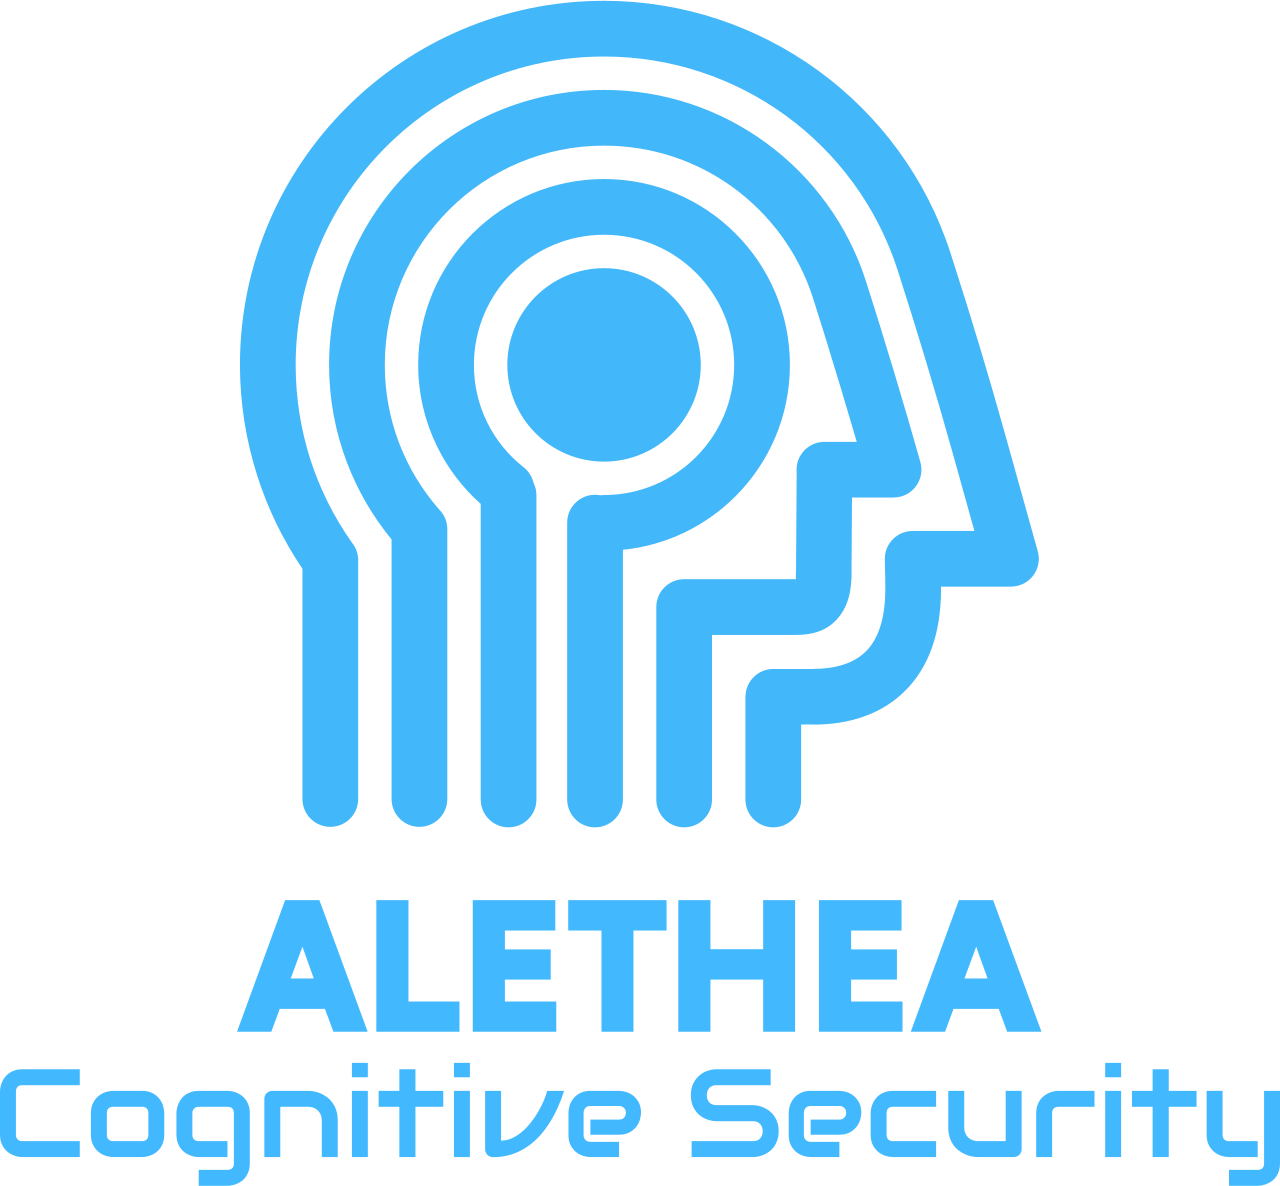 Alethea counter disinformation intelligence 's web page